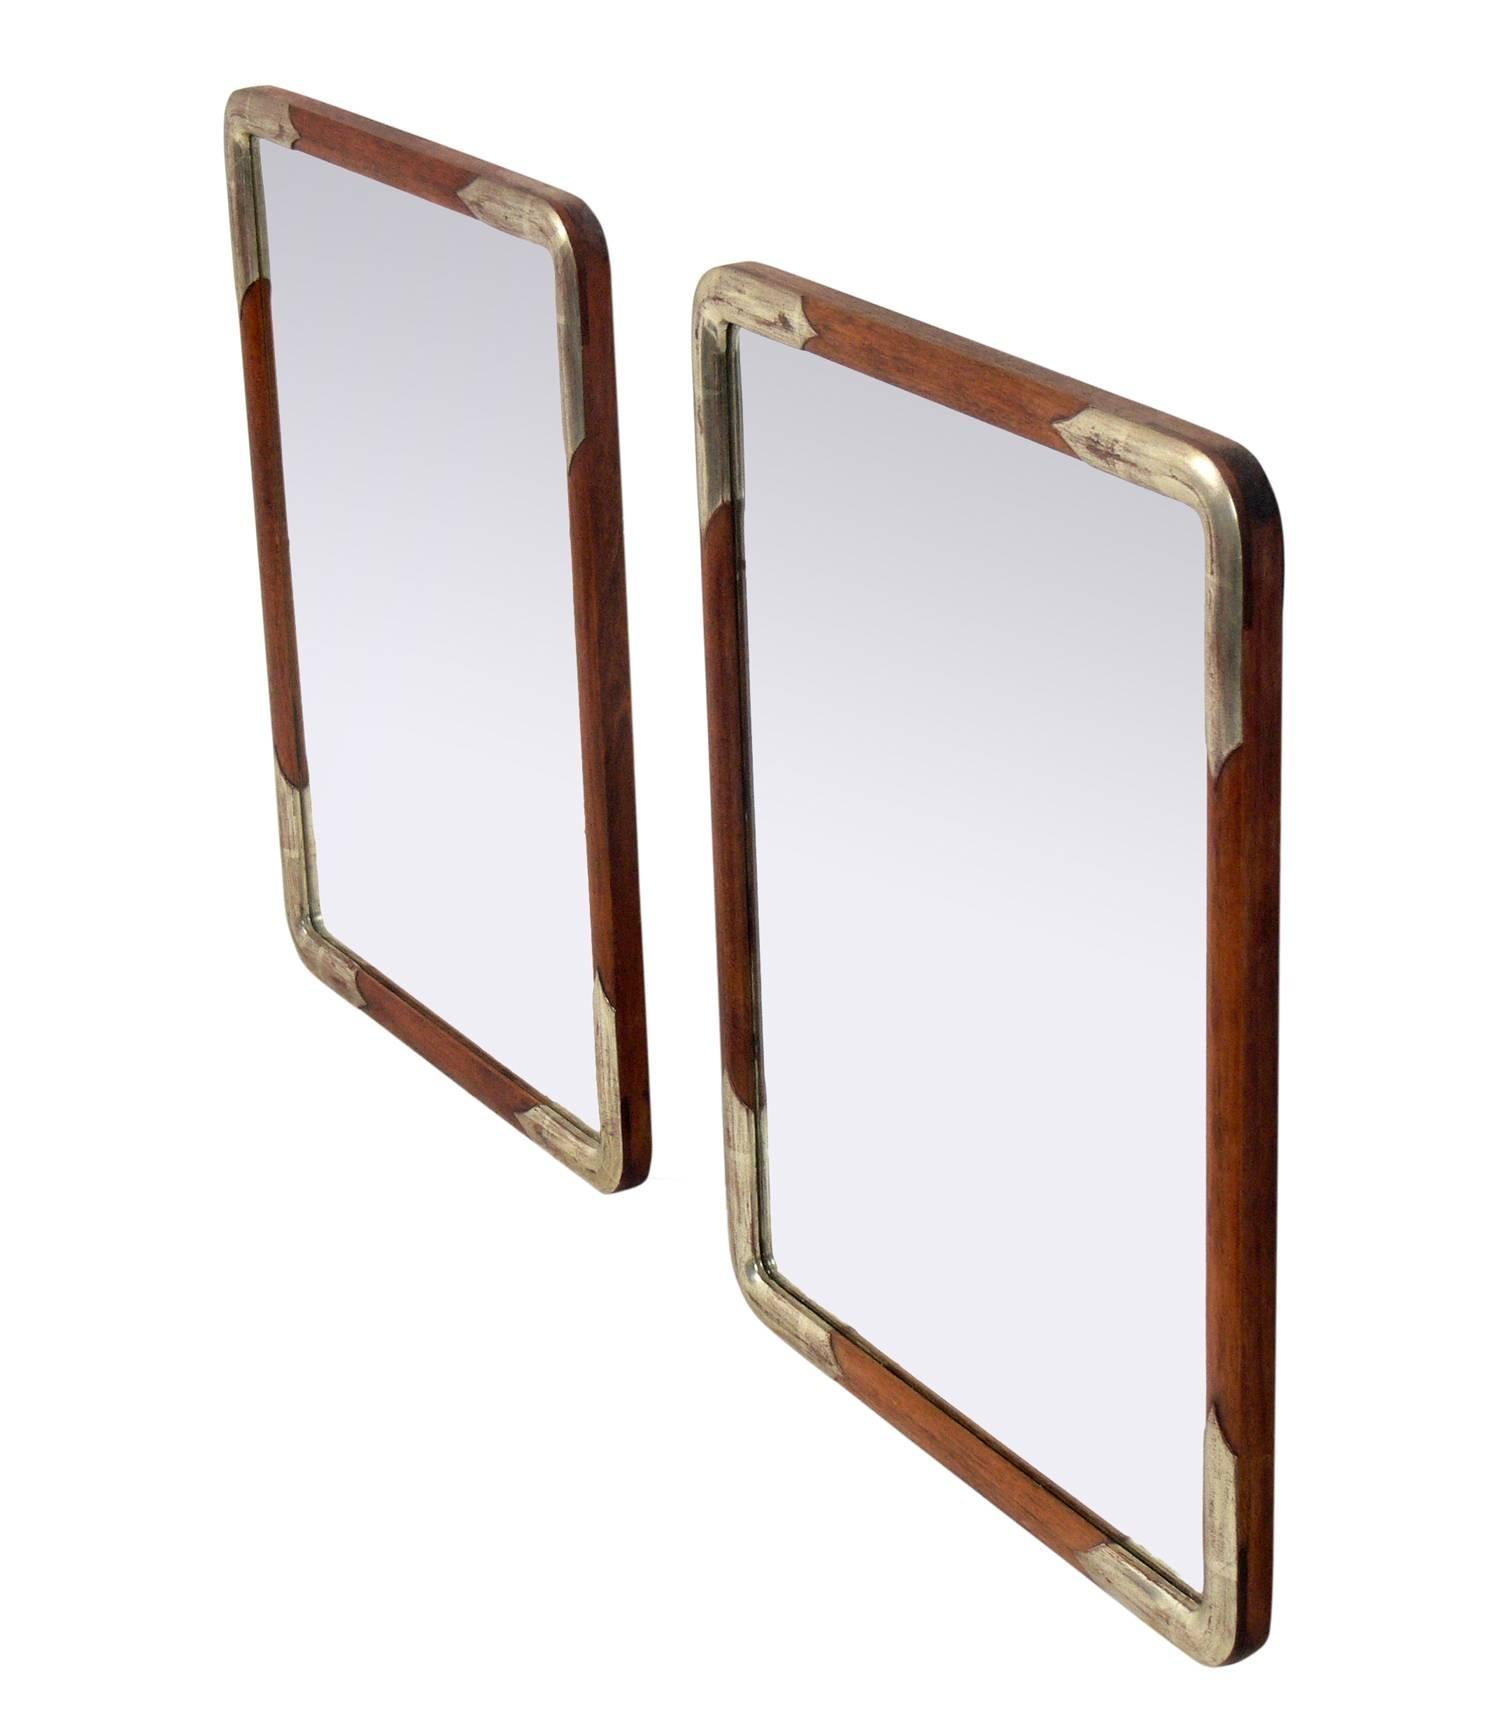 Pair of silver leafed and natural wood mirrors, Japanese, believed to be circa 1950s, possibly earlier. They retain their warm original patina.